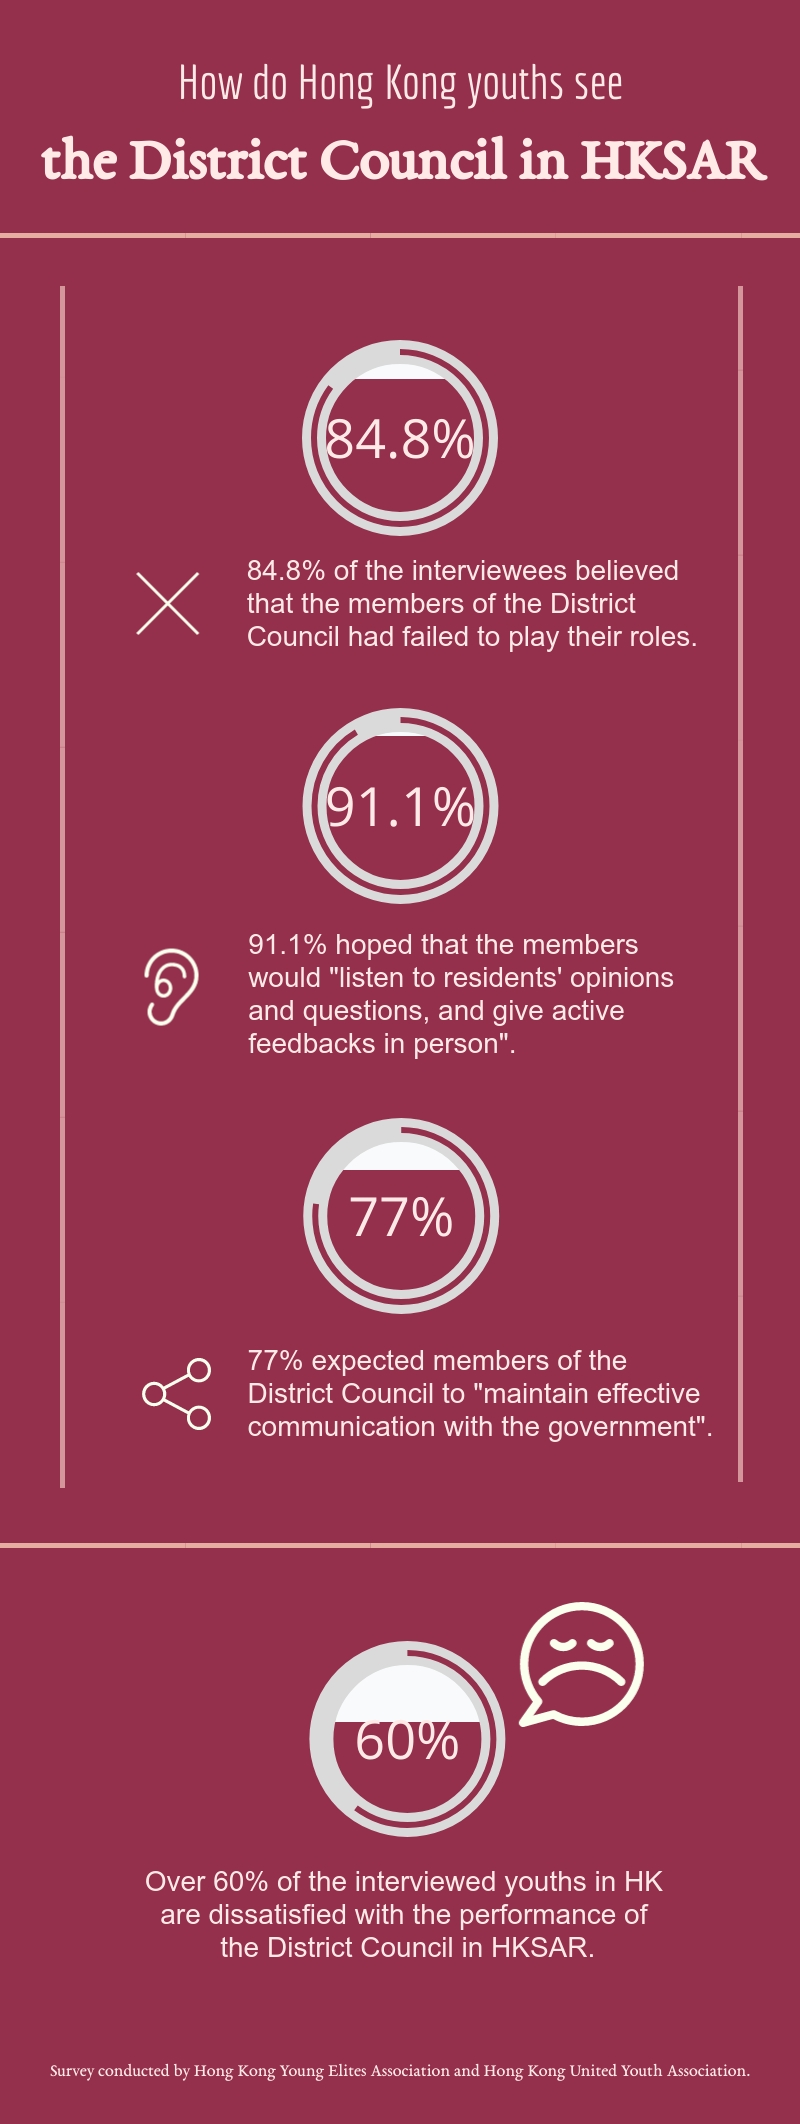 Over 60% of the interviewed youths in HK dissatisfied with the District Council in HKSAR